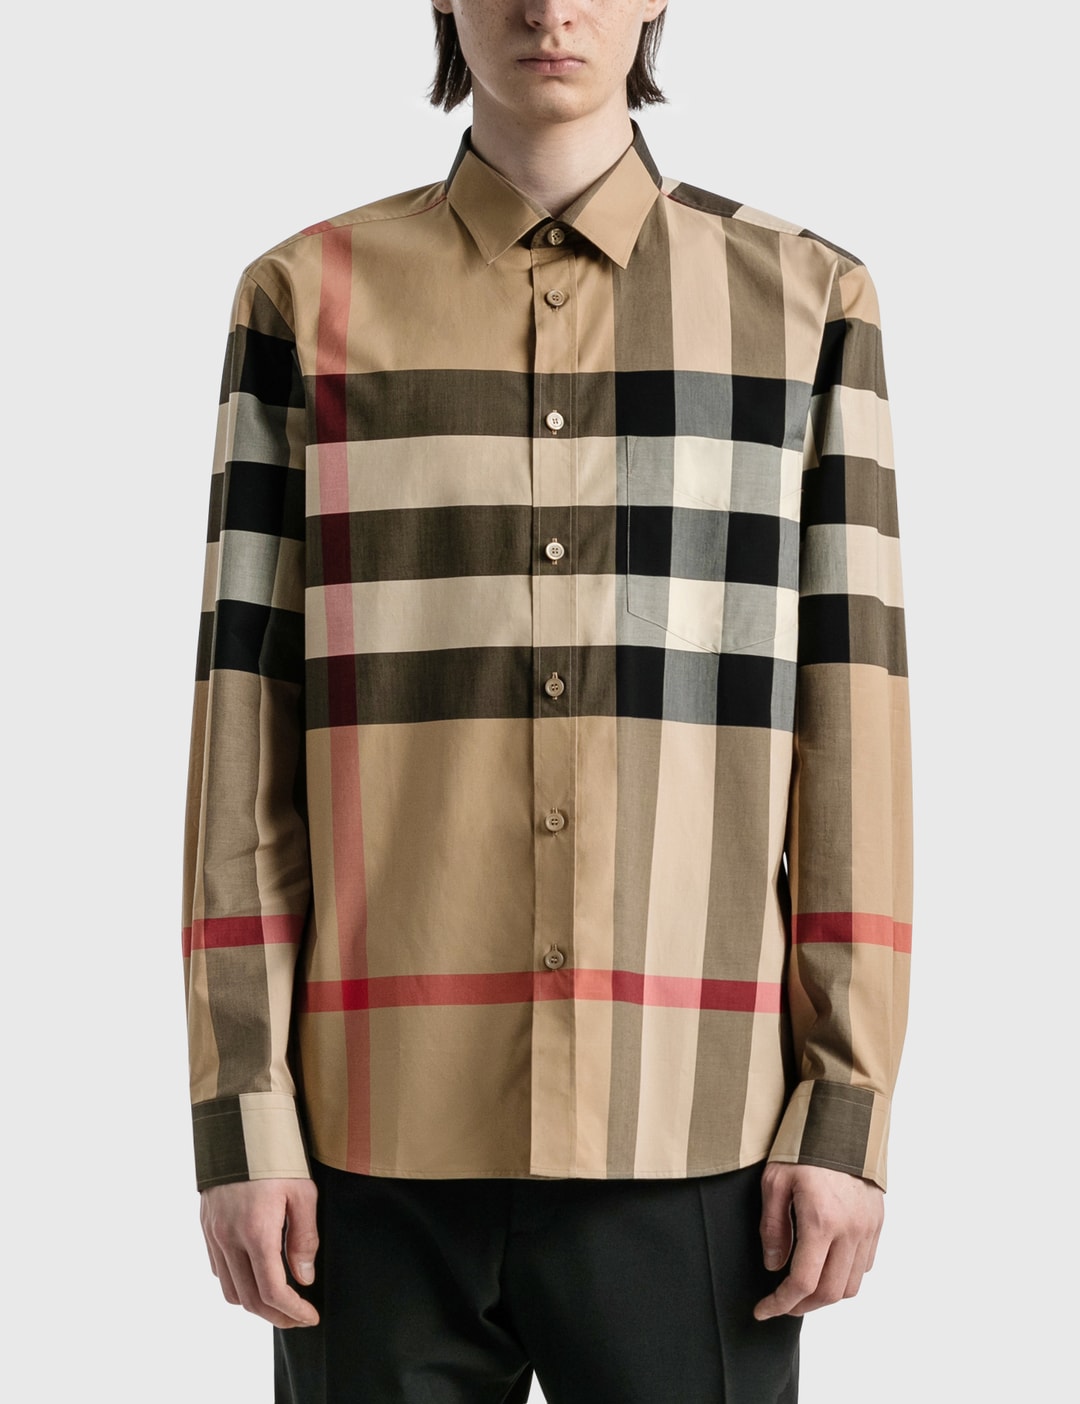 Burberry - Check Stretch Cotton Poplin Shirt | HBX - Globally Curated Fashion and Lifestyle by Hypebeast